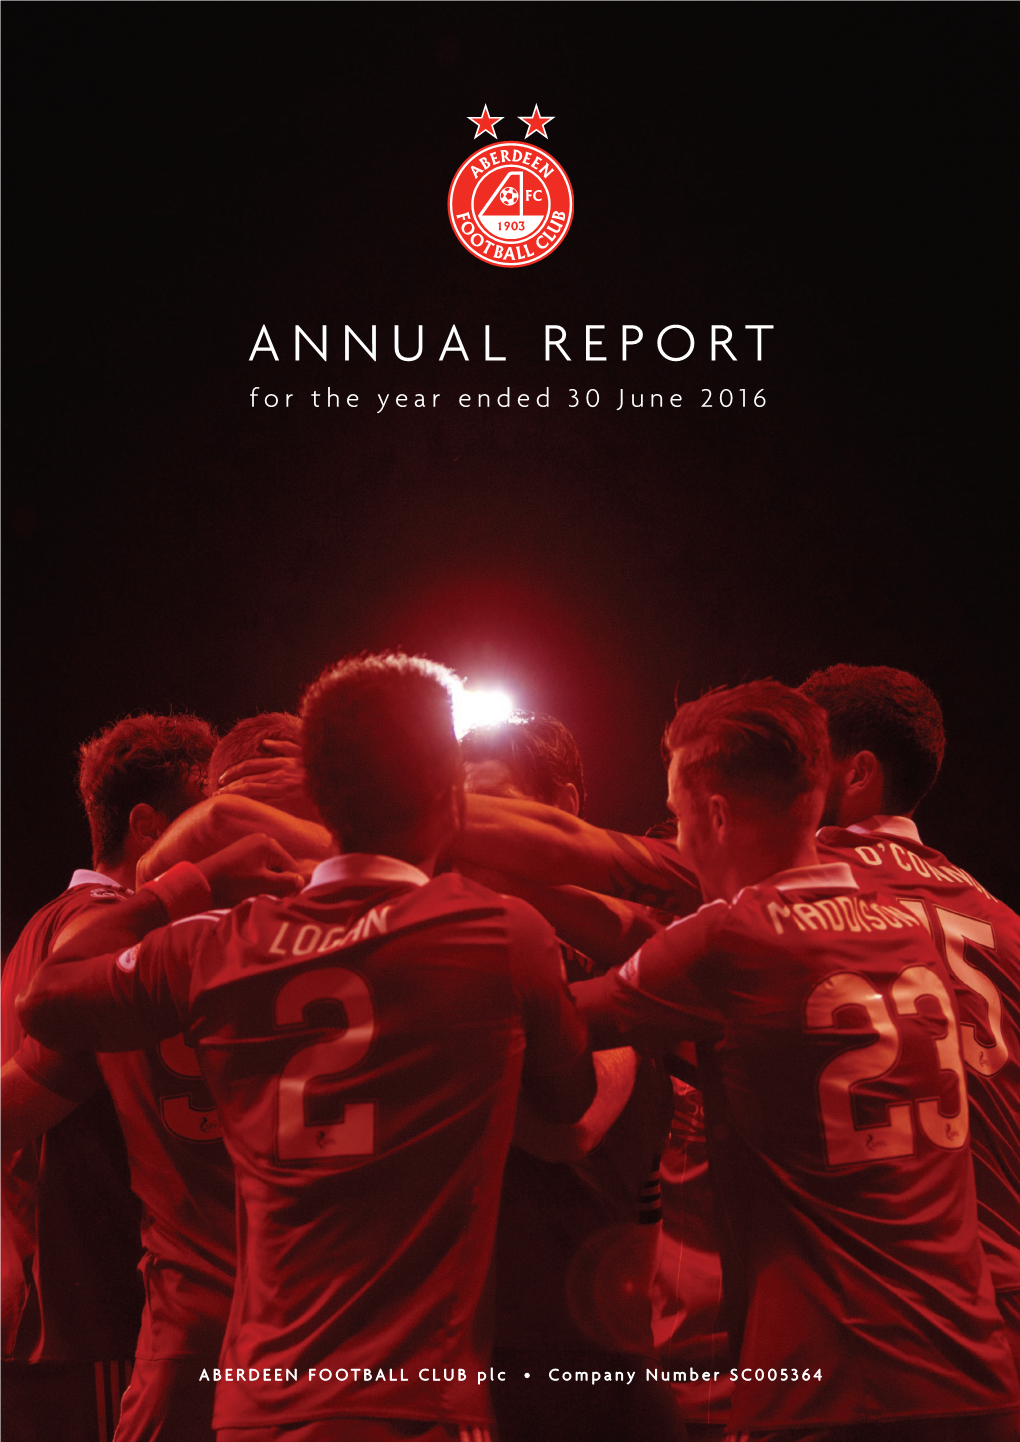 ANNUAL REPORT for the Year Ended 30 June 2016